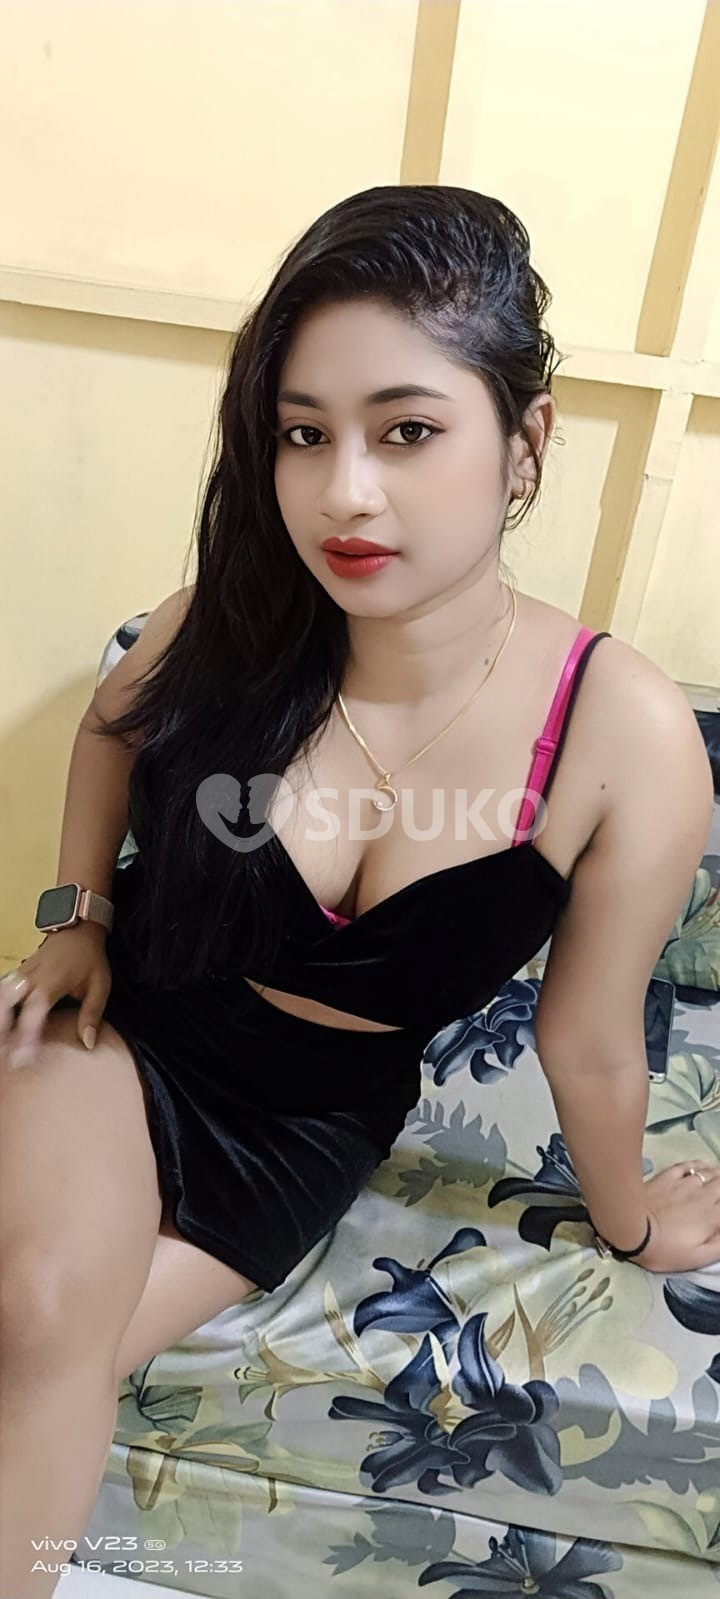 Whitefield❣️Best call girl /service in low price high profile call girl available call me anytime